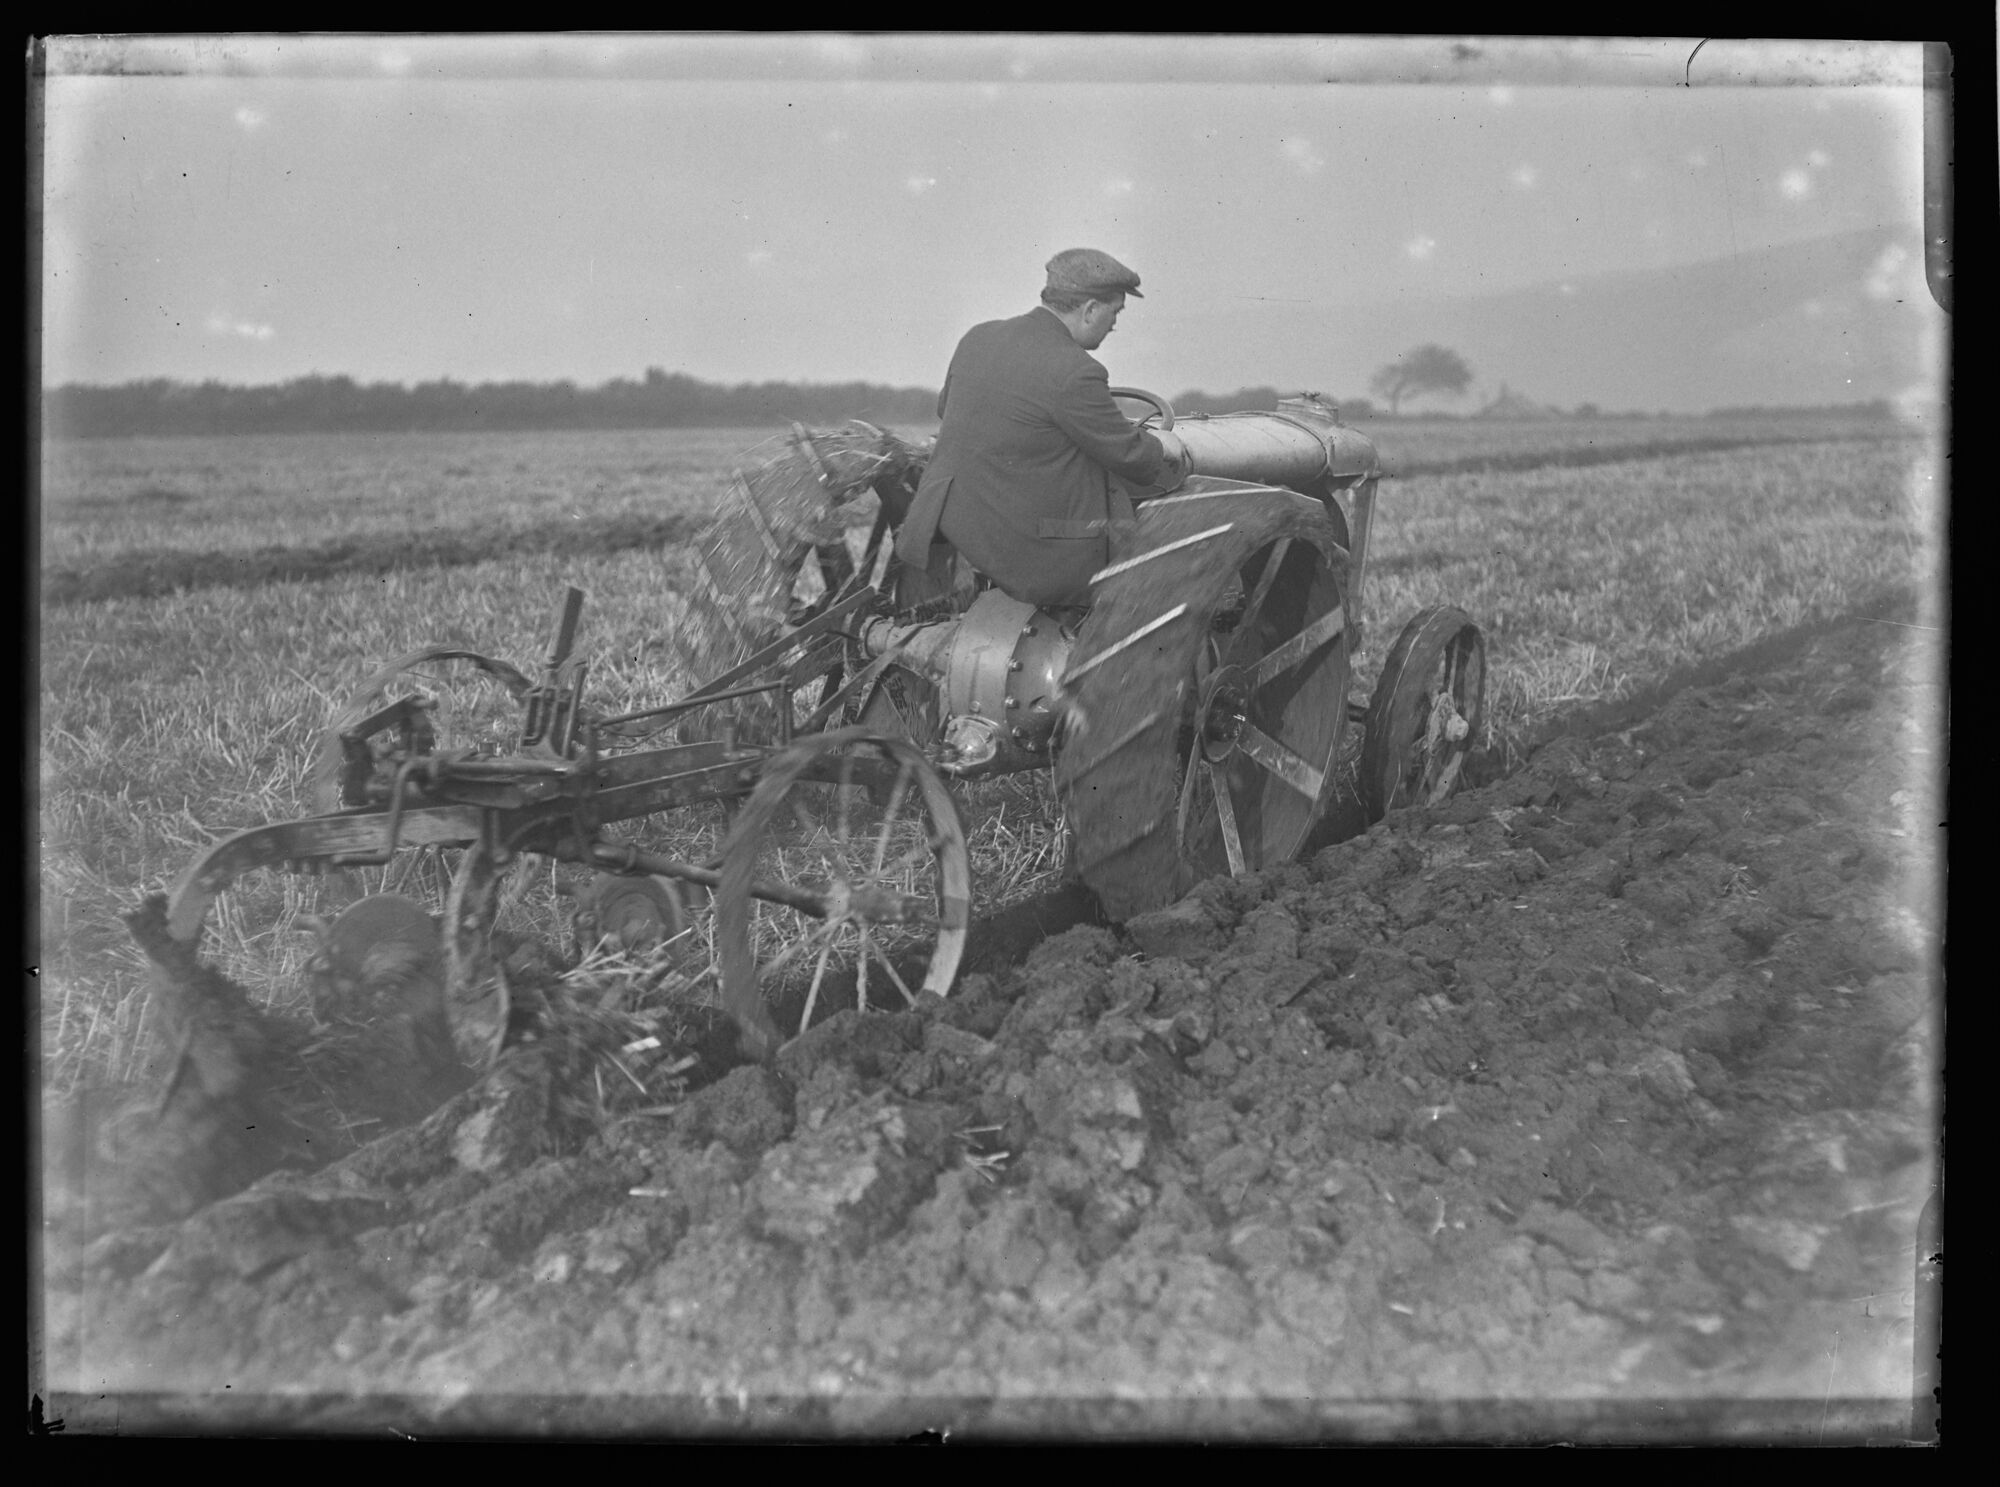 Plowing with an early tractor, as they began to supplant horses